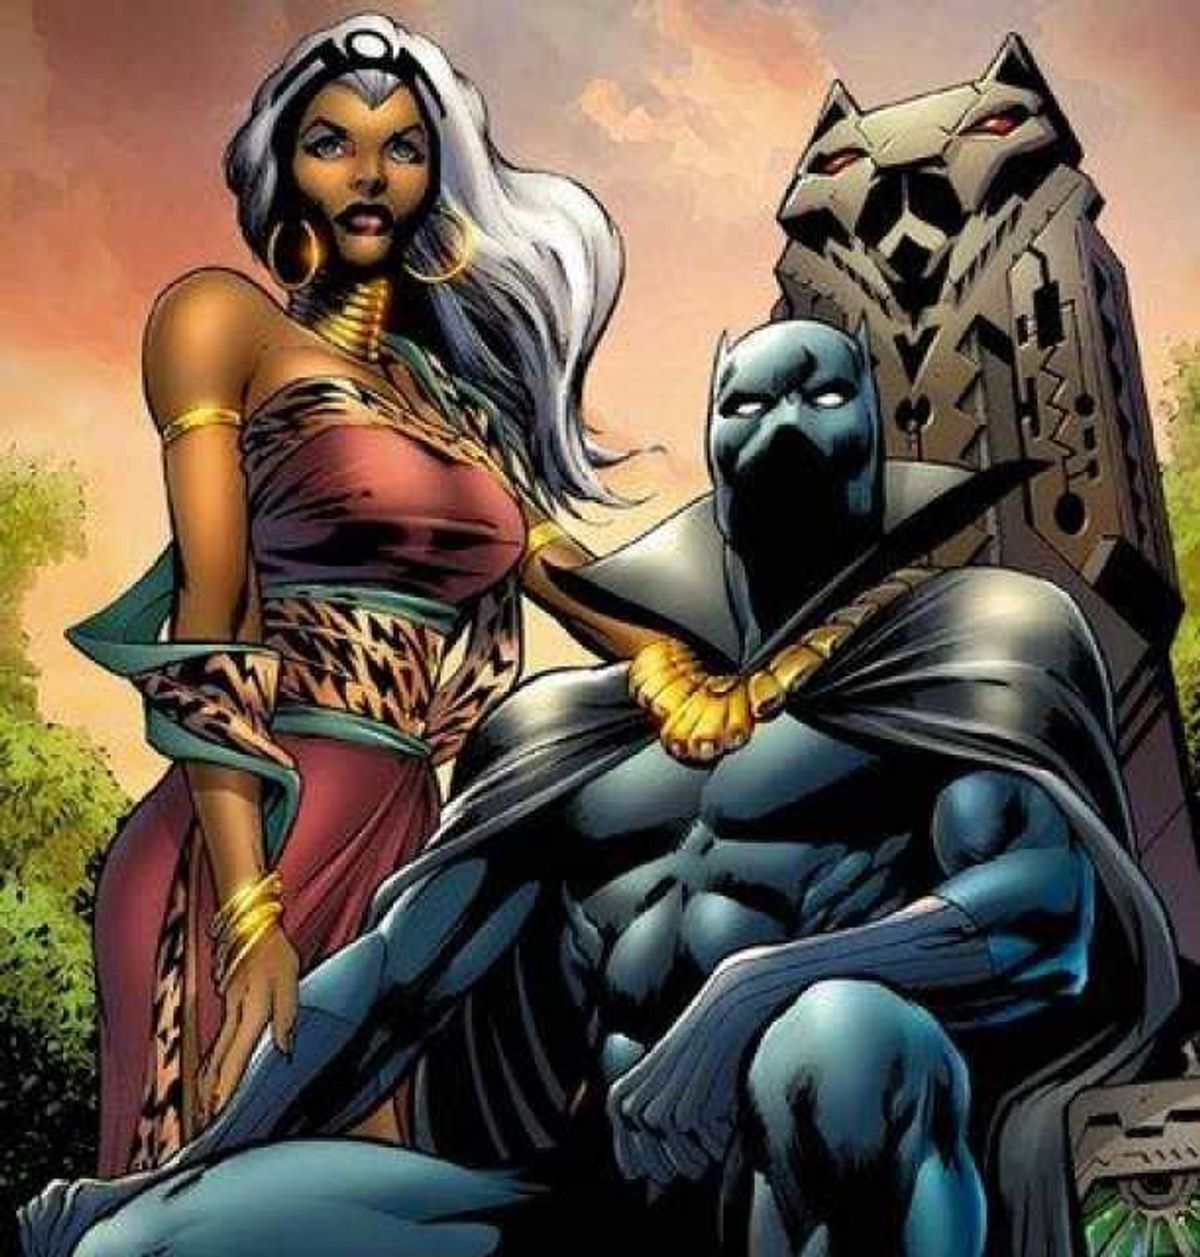 Why The Black Panther Is So Important To The Black Community